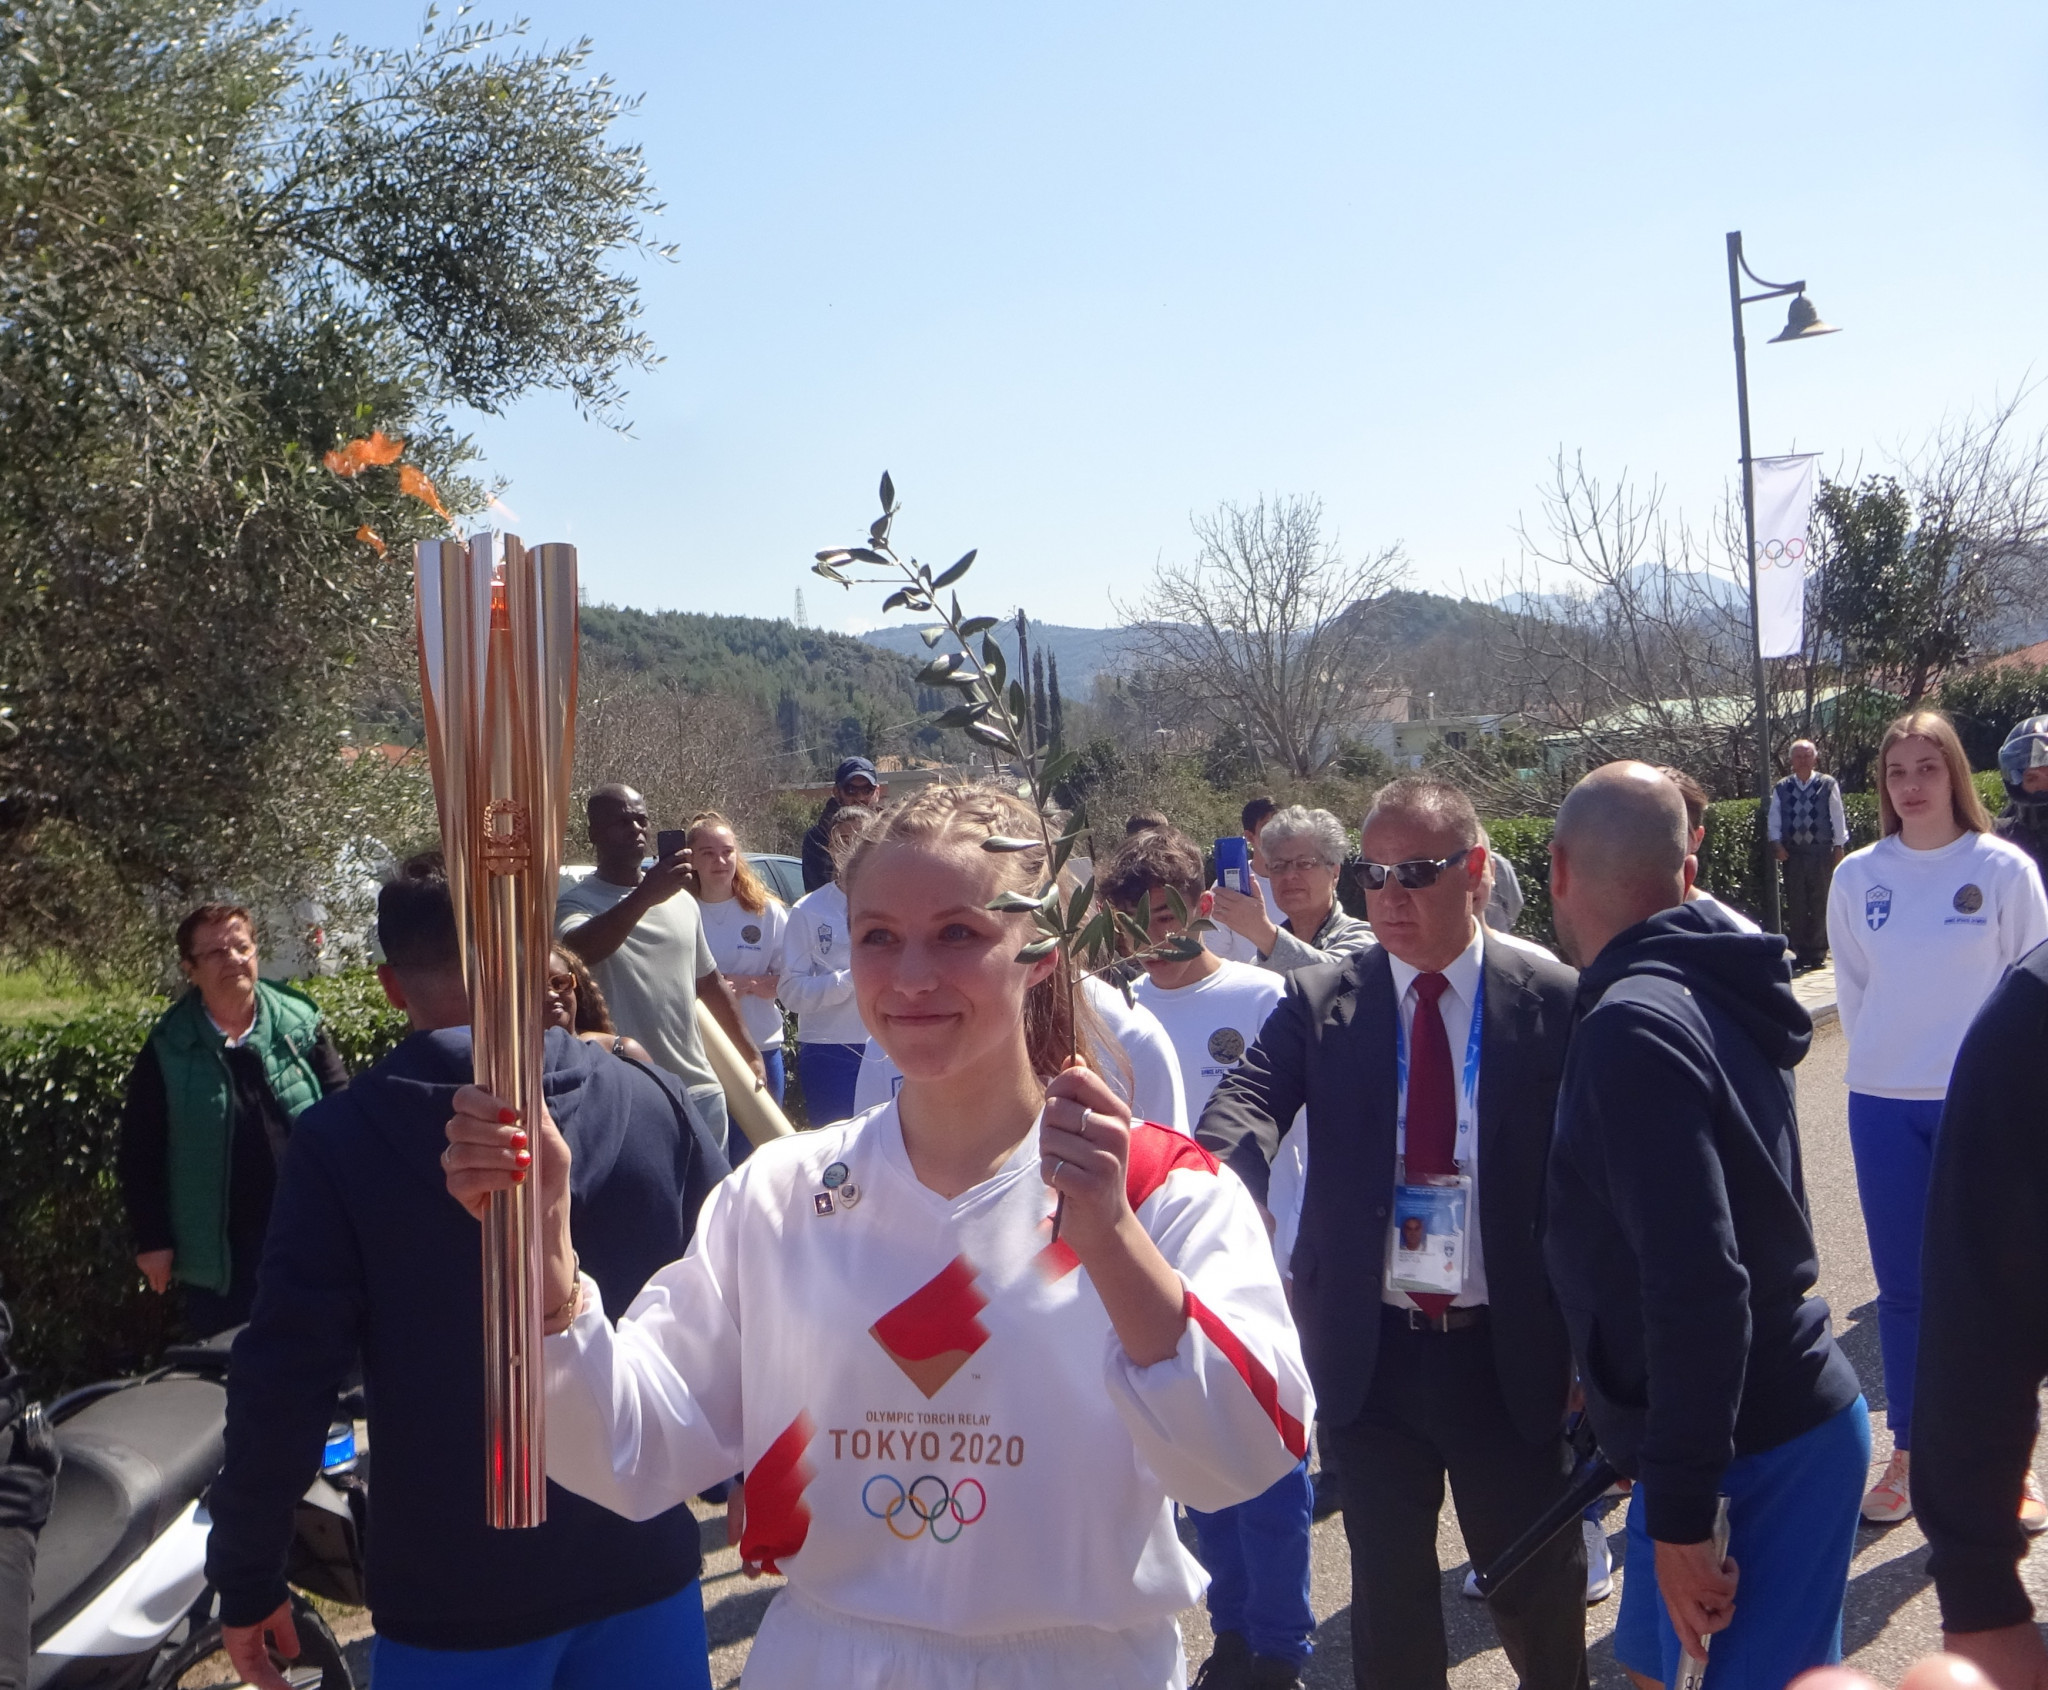 Replacement Torchbearer steps in during Tokyo 2020 Relay due to coronavirus withdrawal